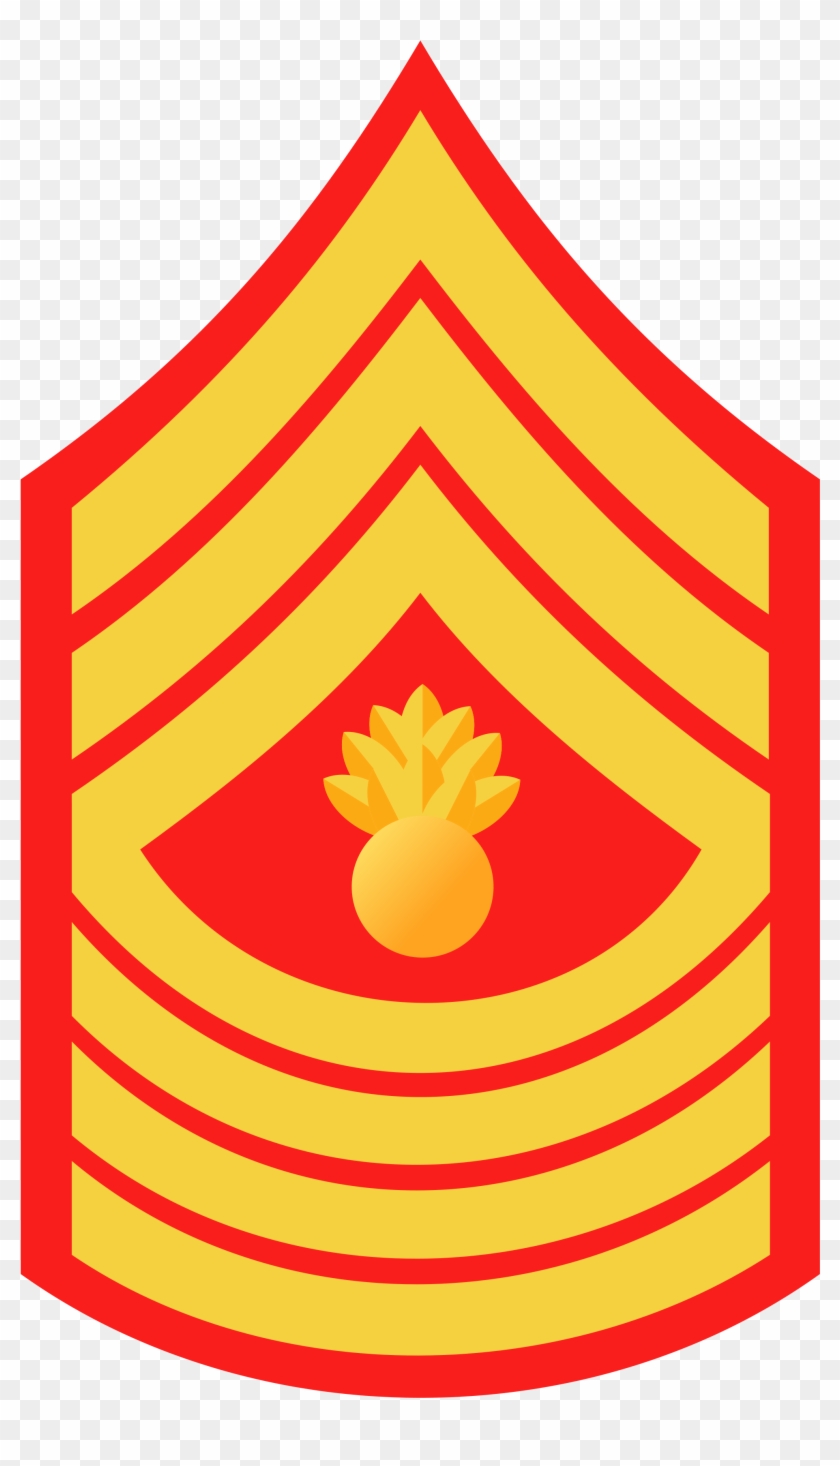 How To Draw A Police Badge 17, Buy Clip Art - Sergeant Major Of The Marine Corps Rank #391012